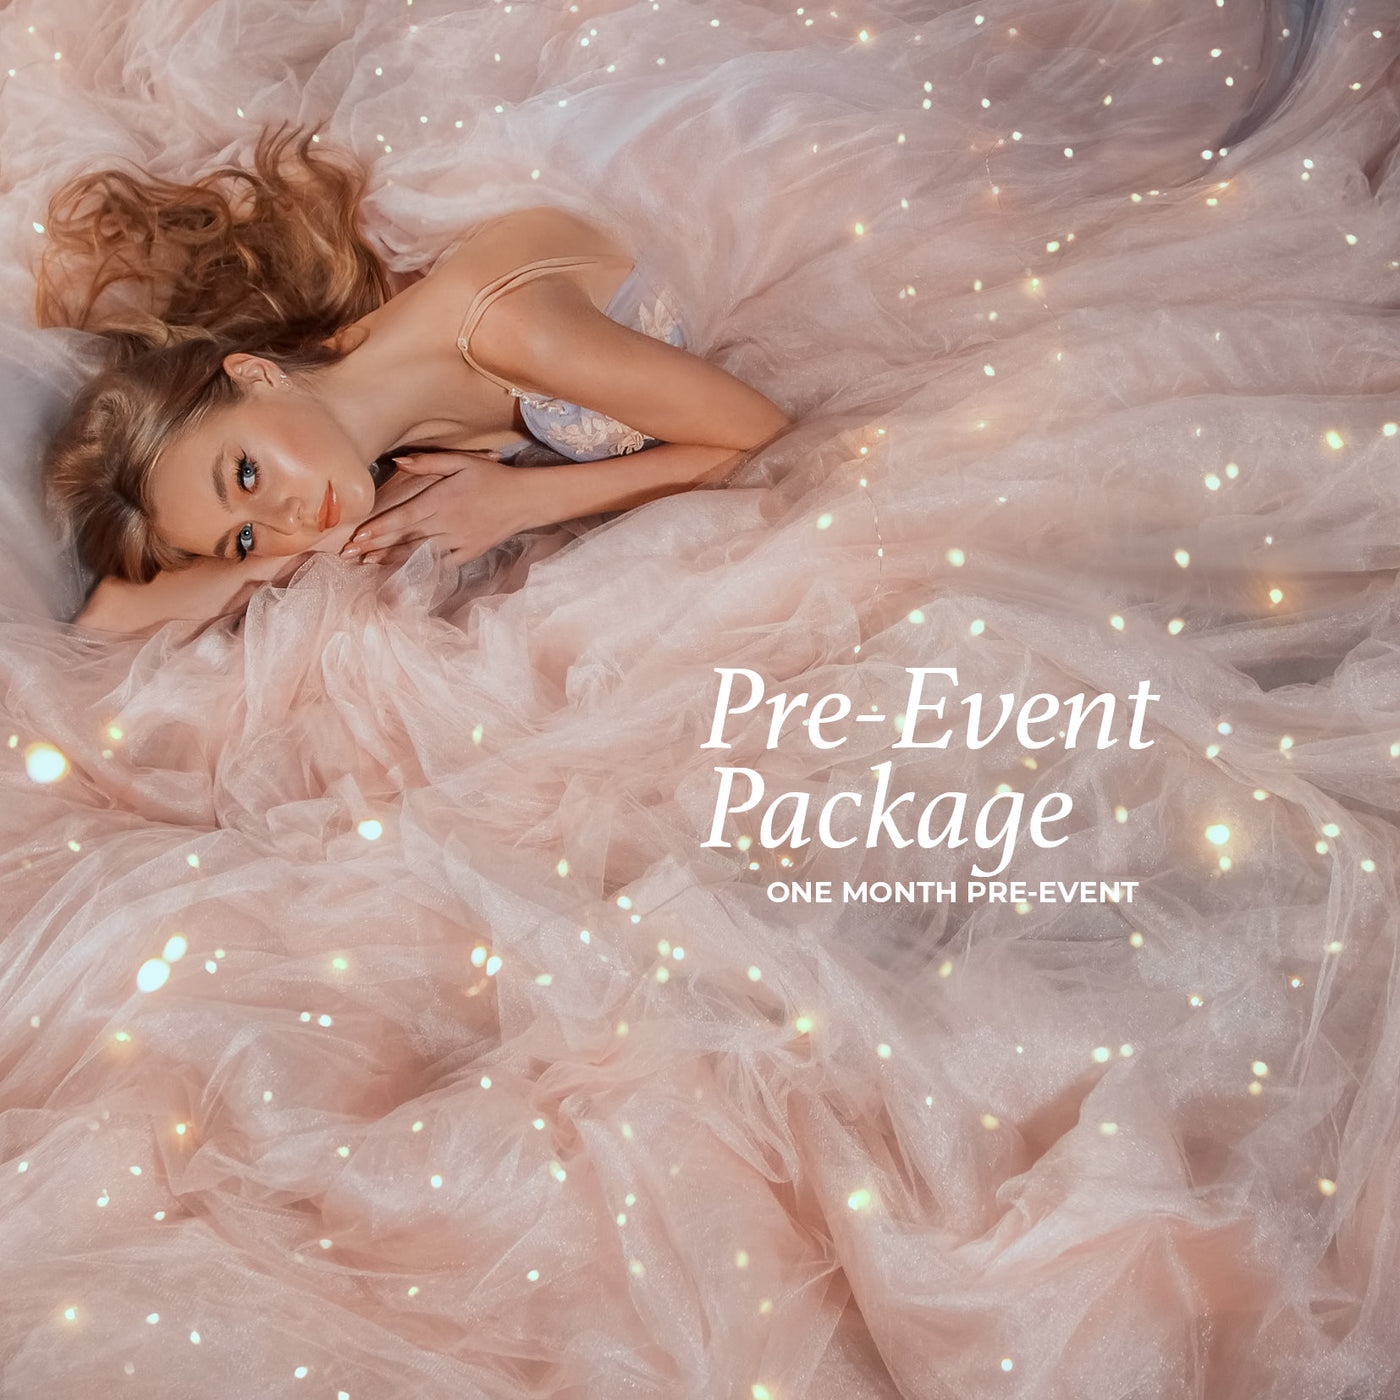 Special Event Package - 1 Month Pre-Event